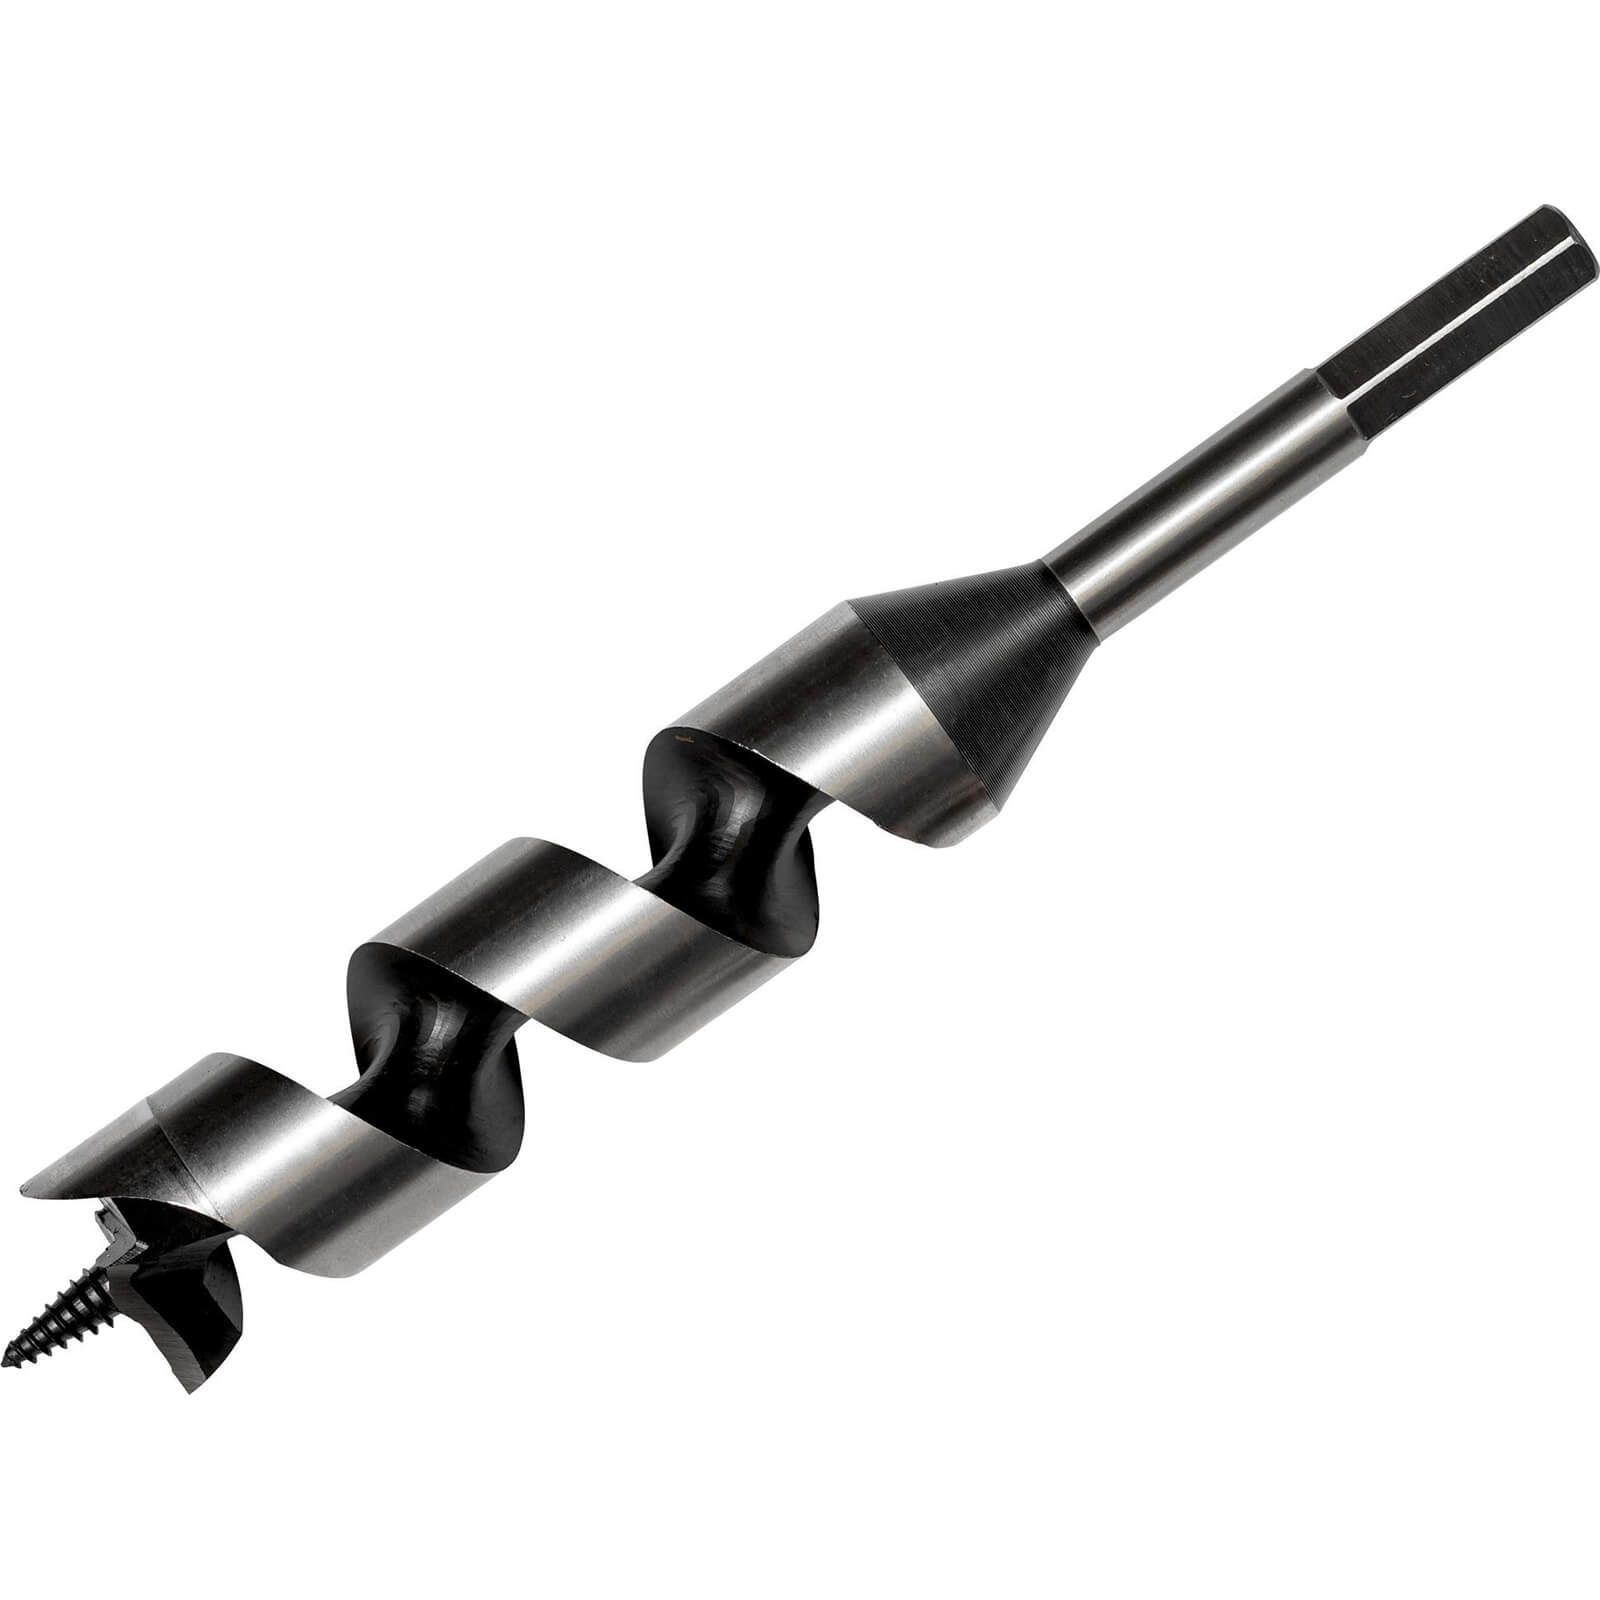 Image of Bahco 9626 Series Combination Auger Drill Bit 10mm 230mm